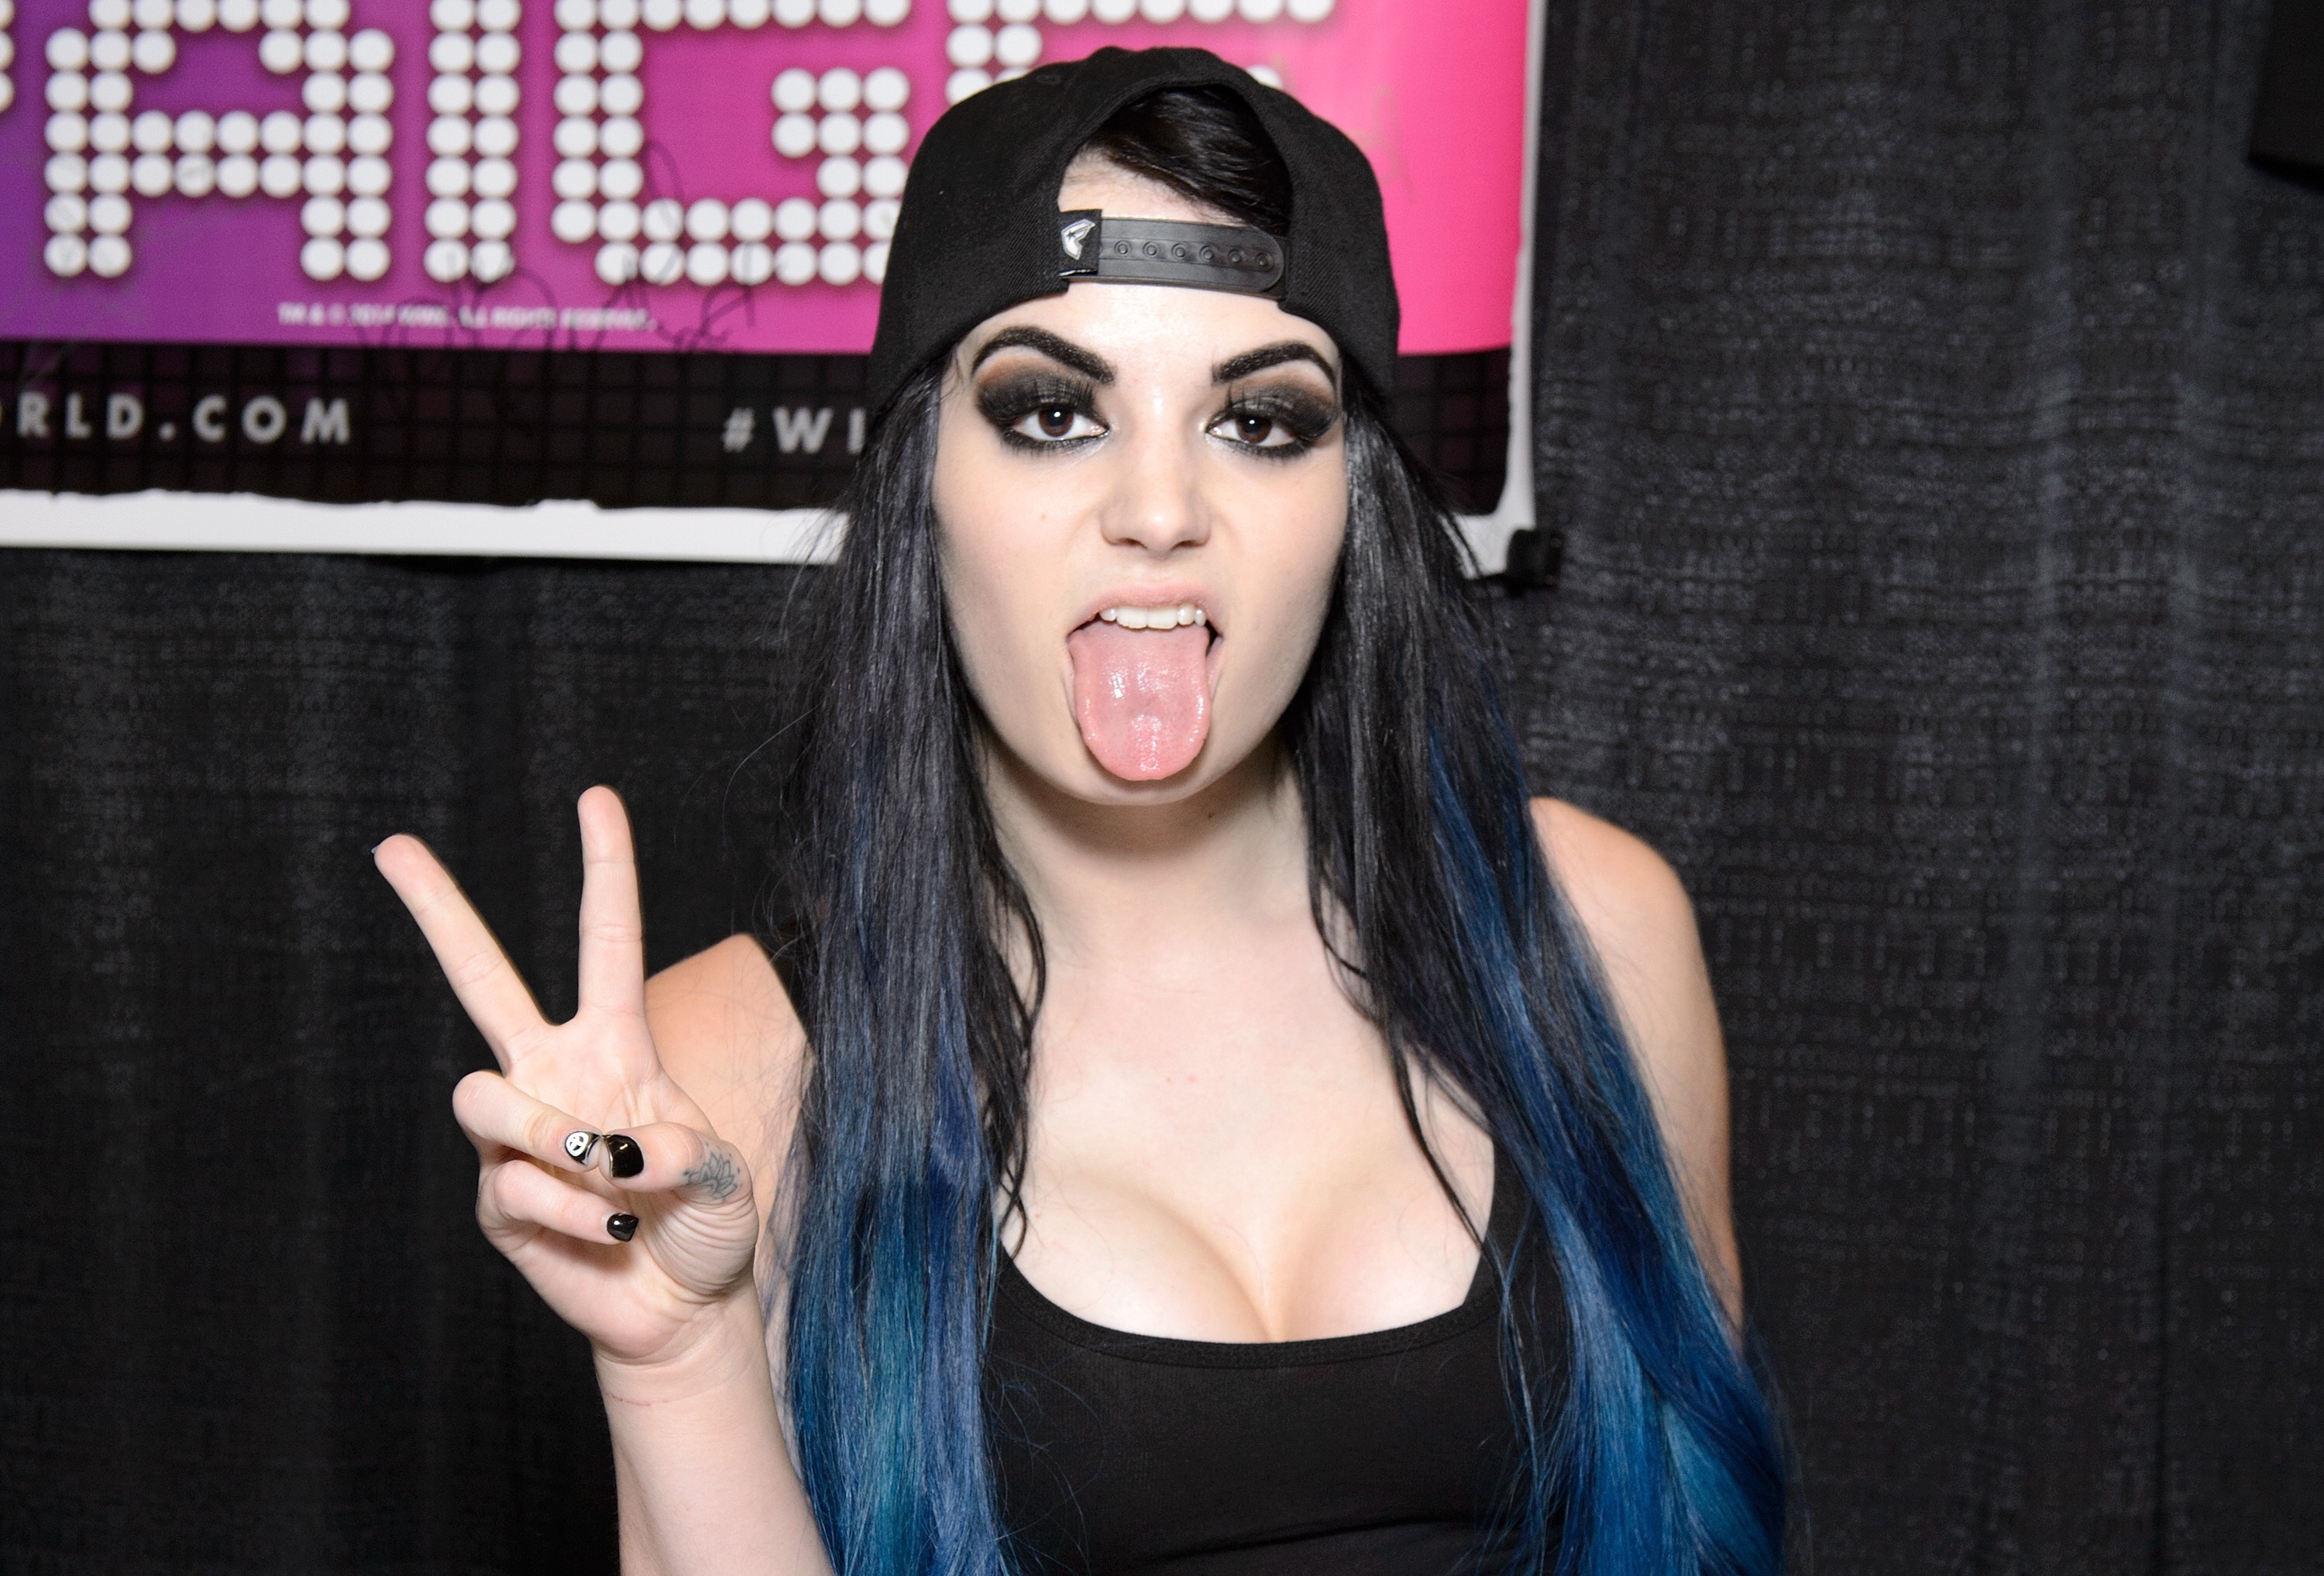 paige-gettyimages-484804728-2.jpg